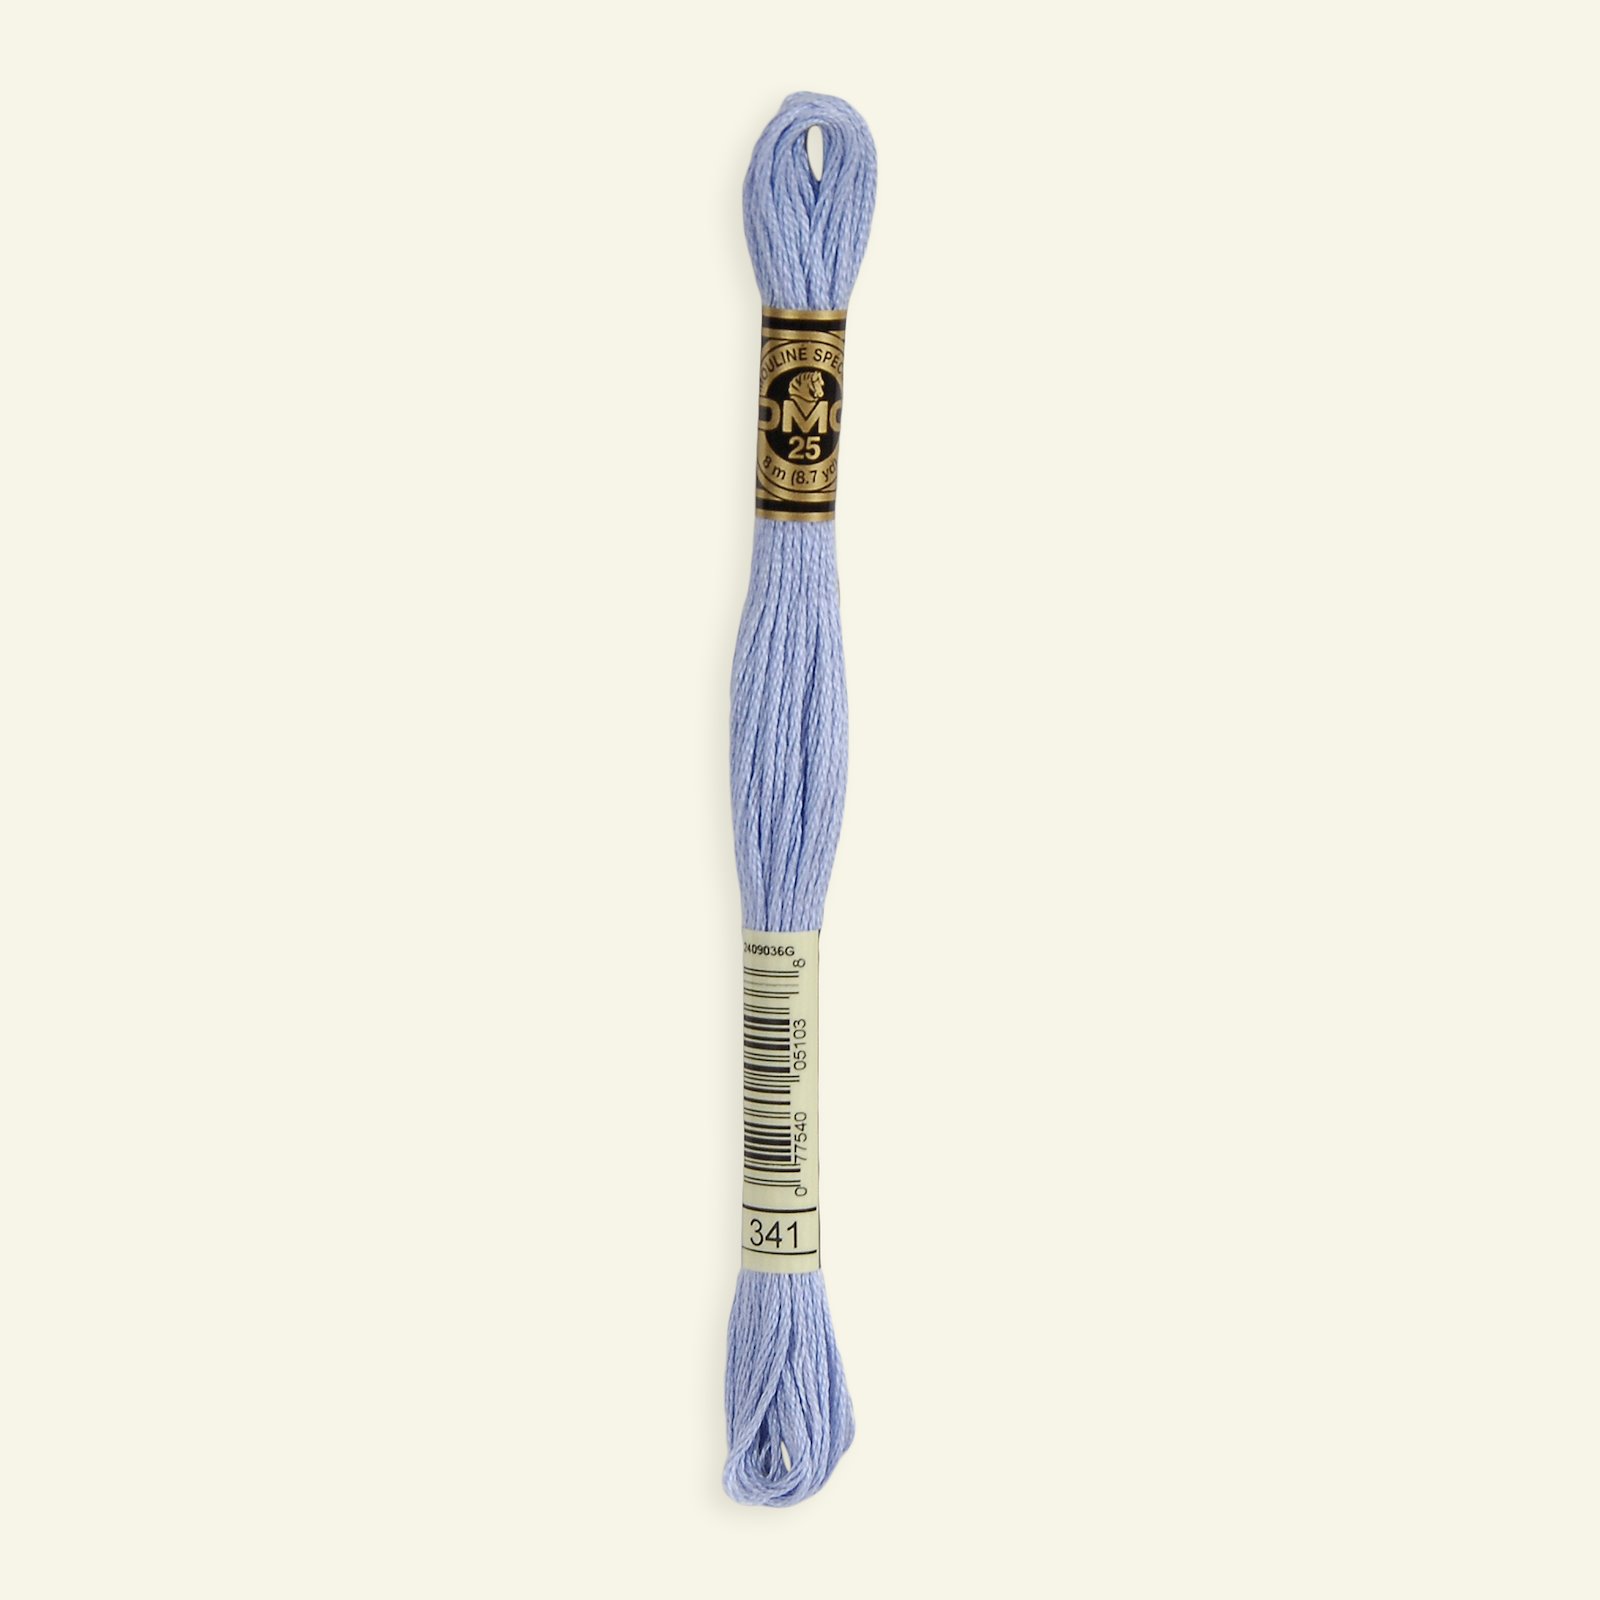 The Urban Store Embroidery Thread Light Blue Violet DMC 341 RRP £1.40 CLEARANCE XL 99p